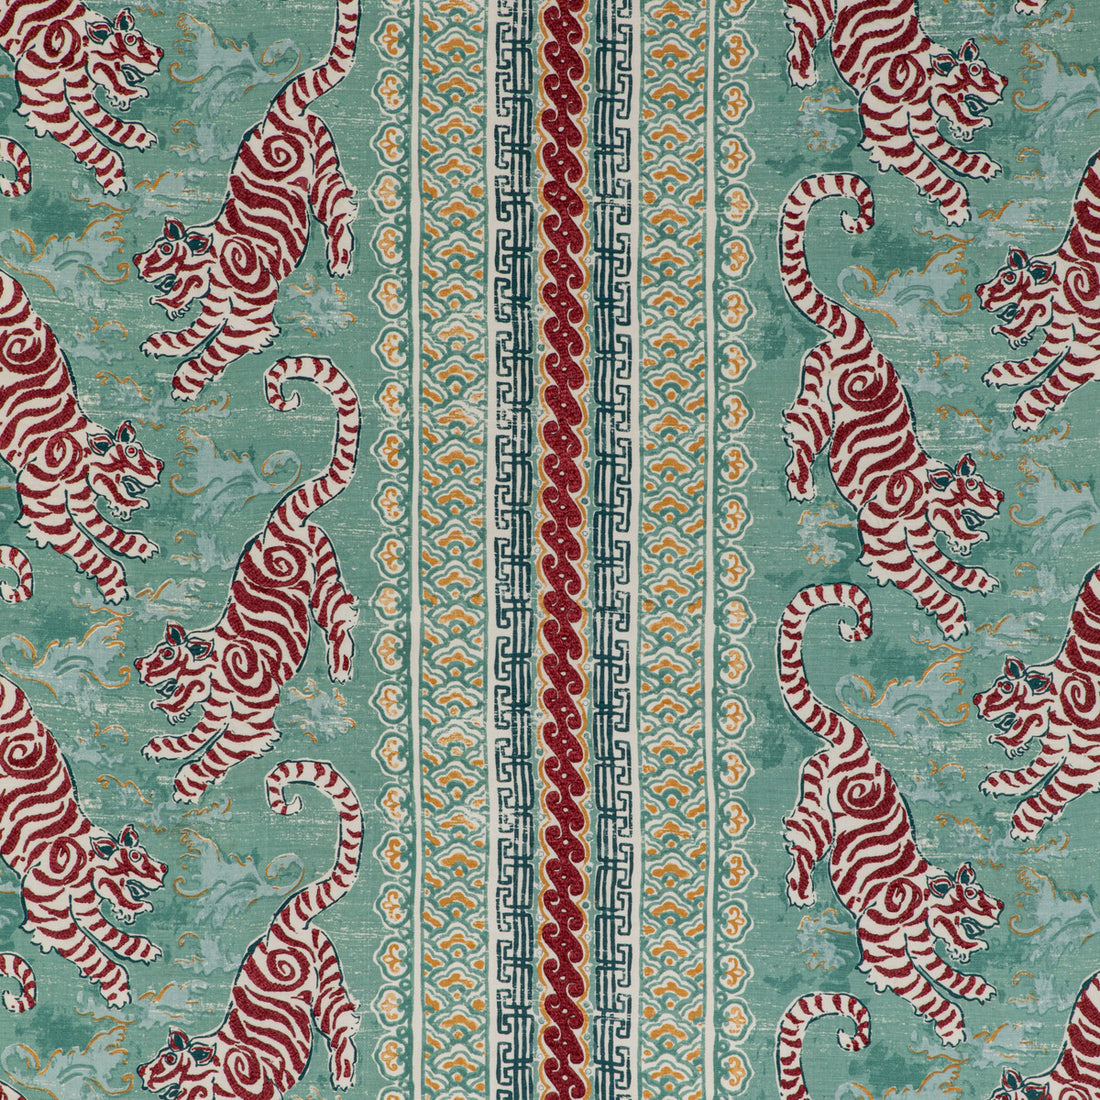 Bongol Print fabric in aqua color - pattern 2020197.1394.0 - by Lee Jofa in the Mindoro collection